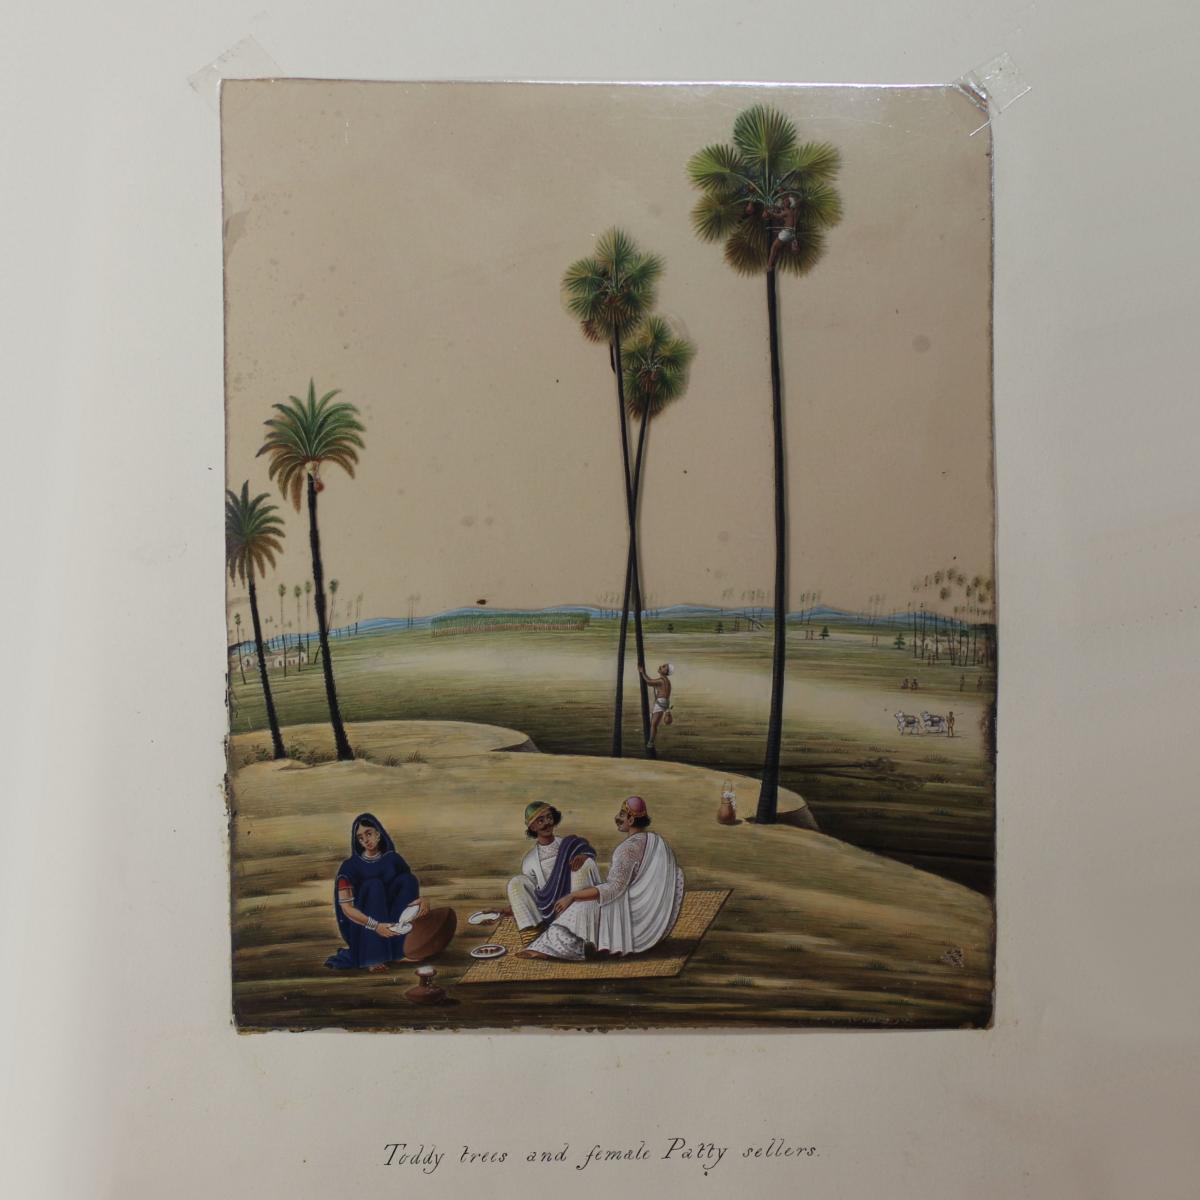 Book of Indian Mica paintings